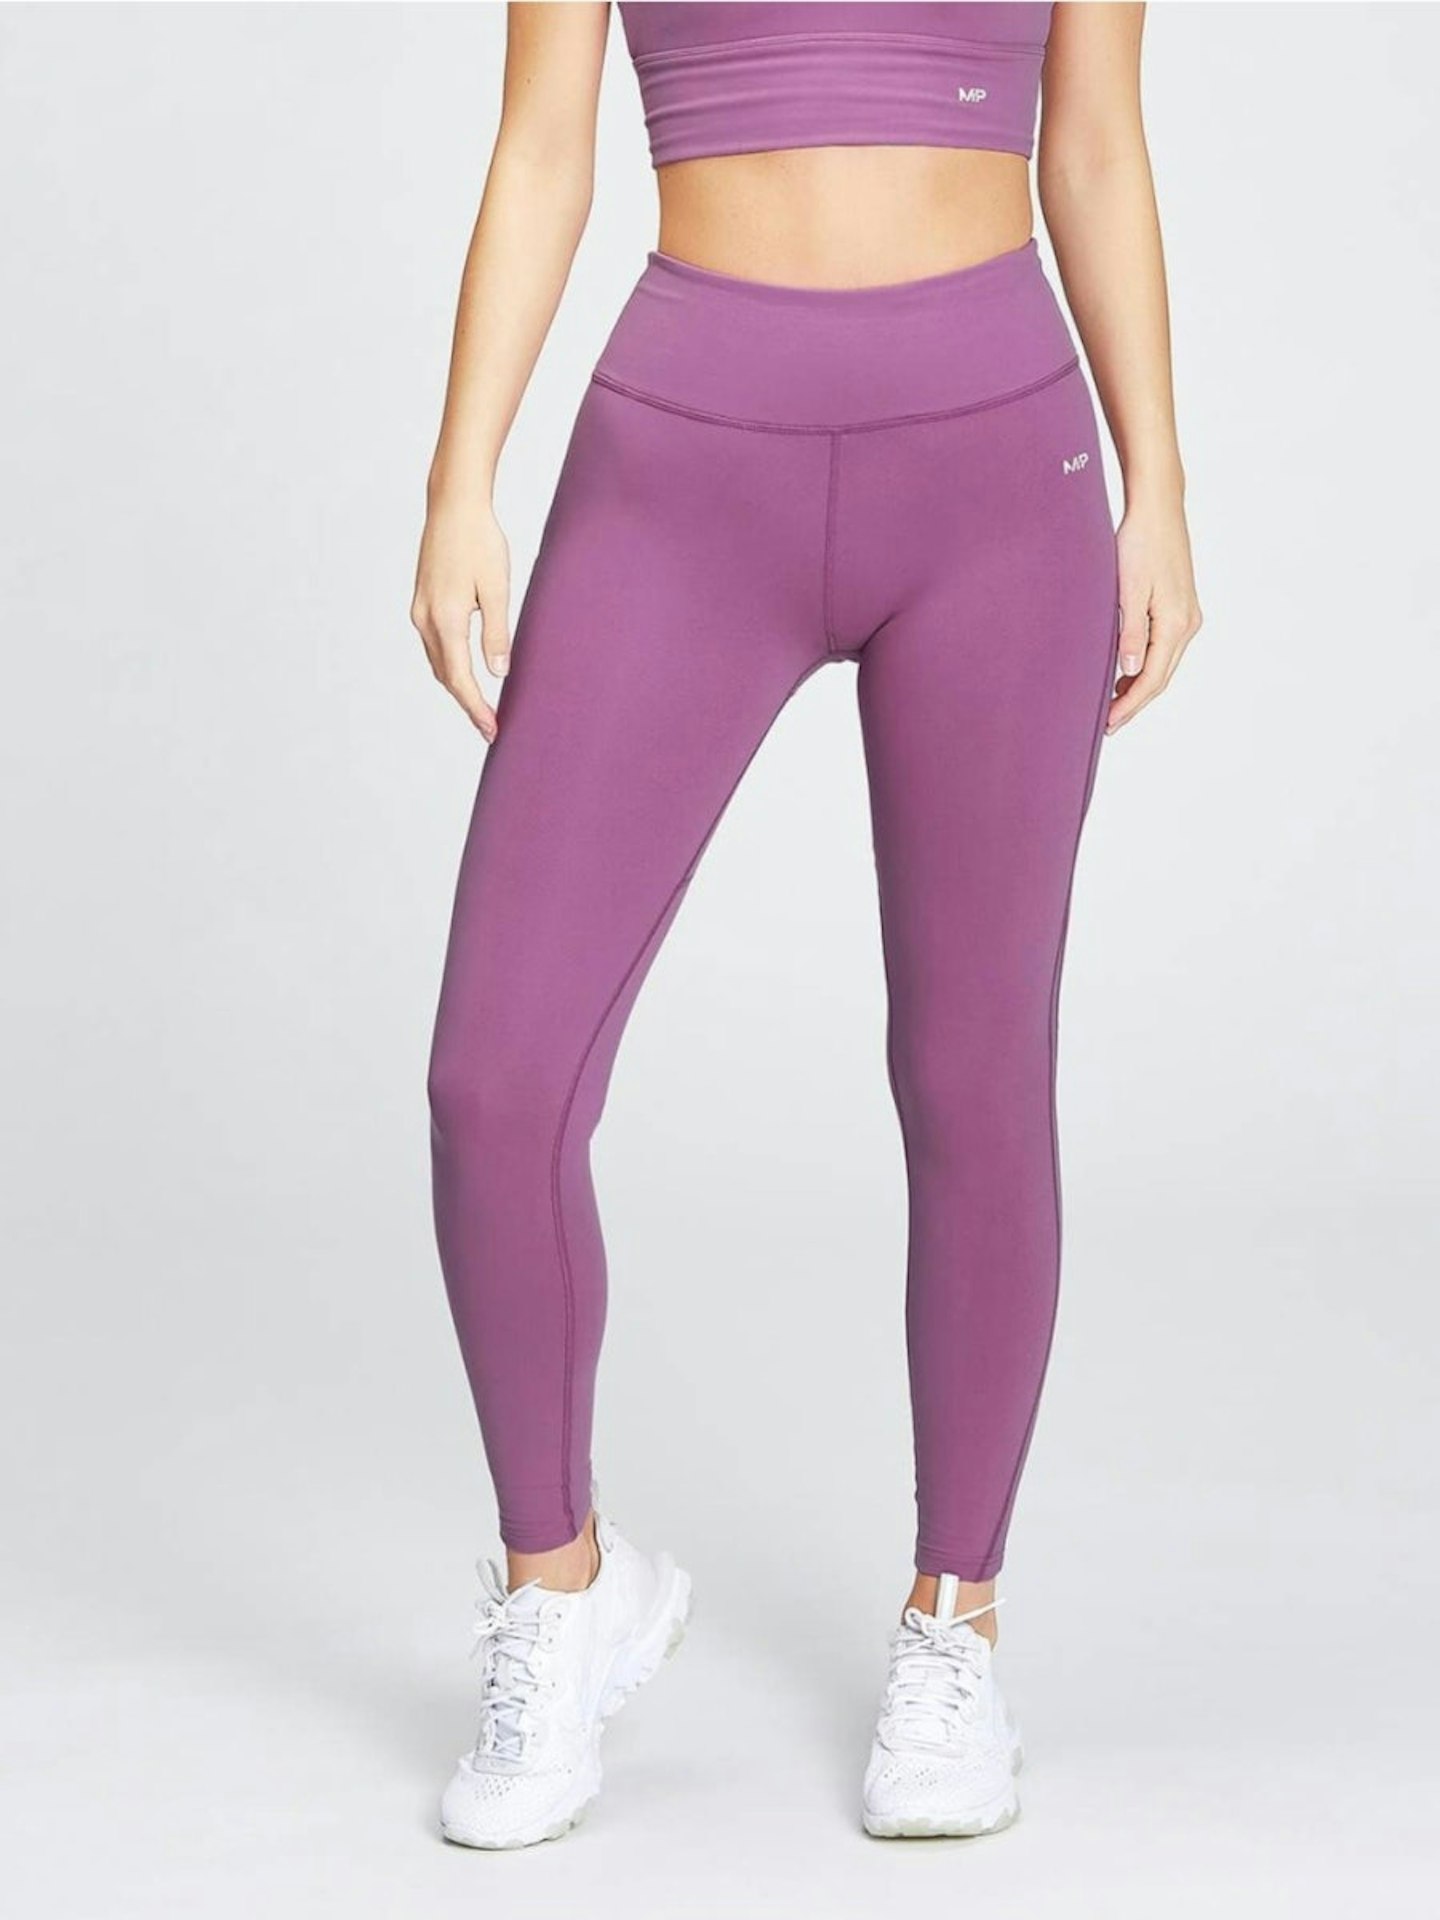 The  Ouges high waisted leggings are a dupe for Lululemon and Sweaty  Betty and on sale